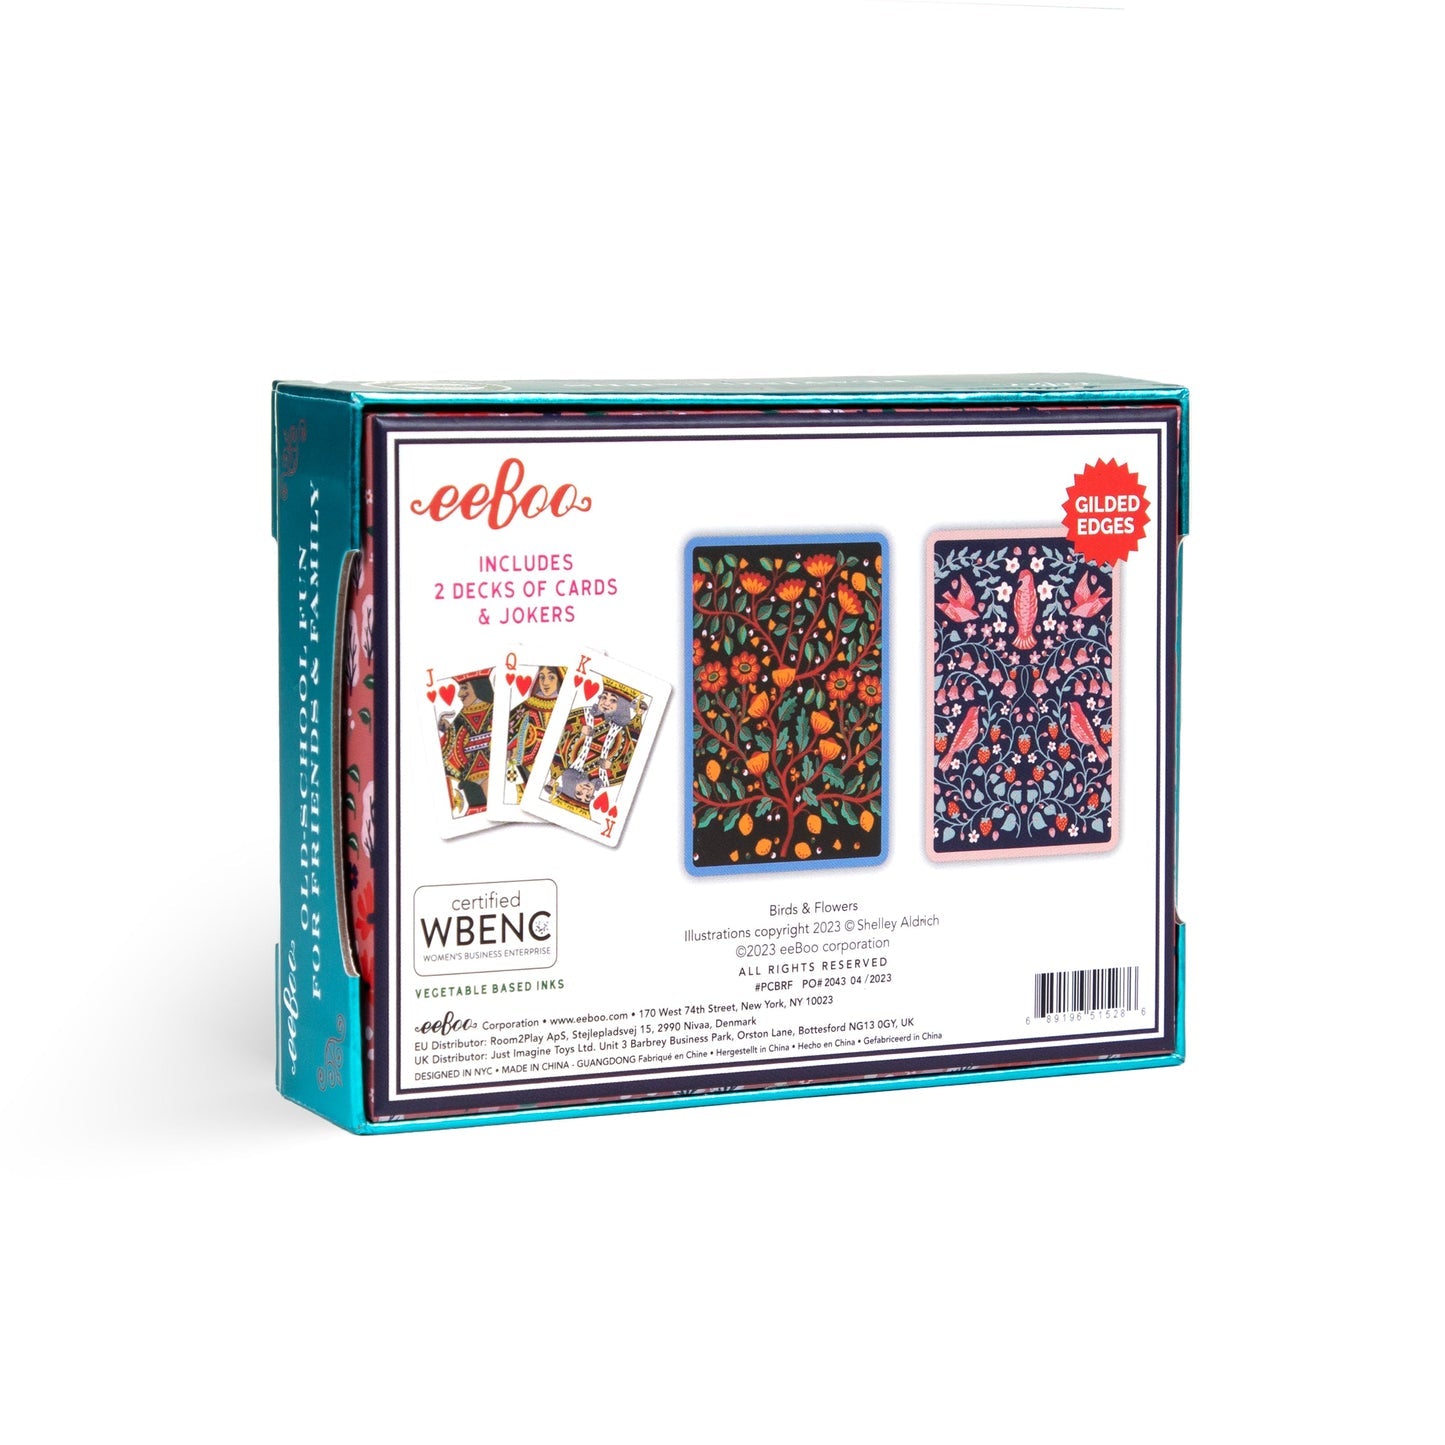 eeBoo "Birds and Flowers" Playing Cards